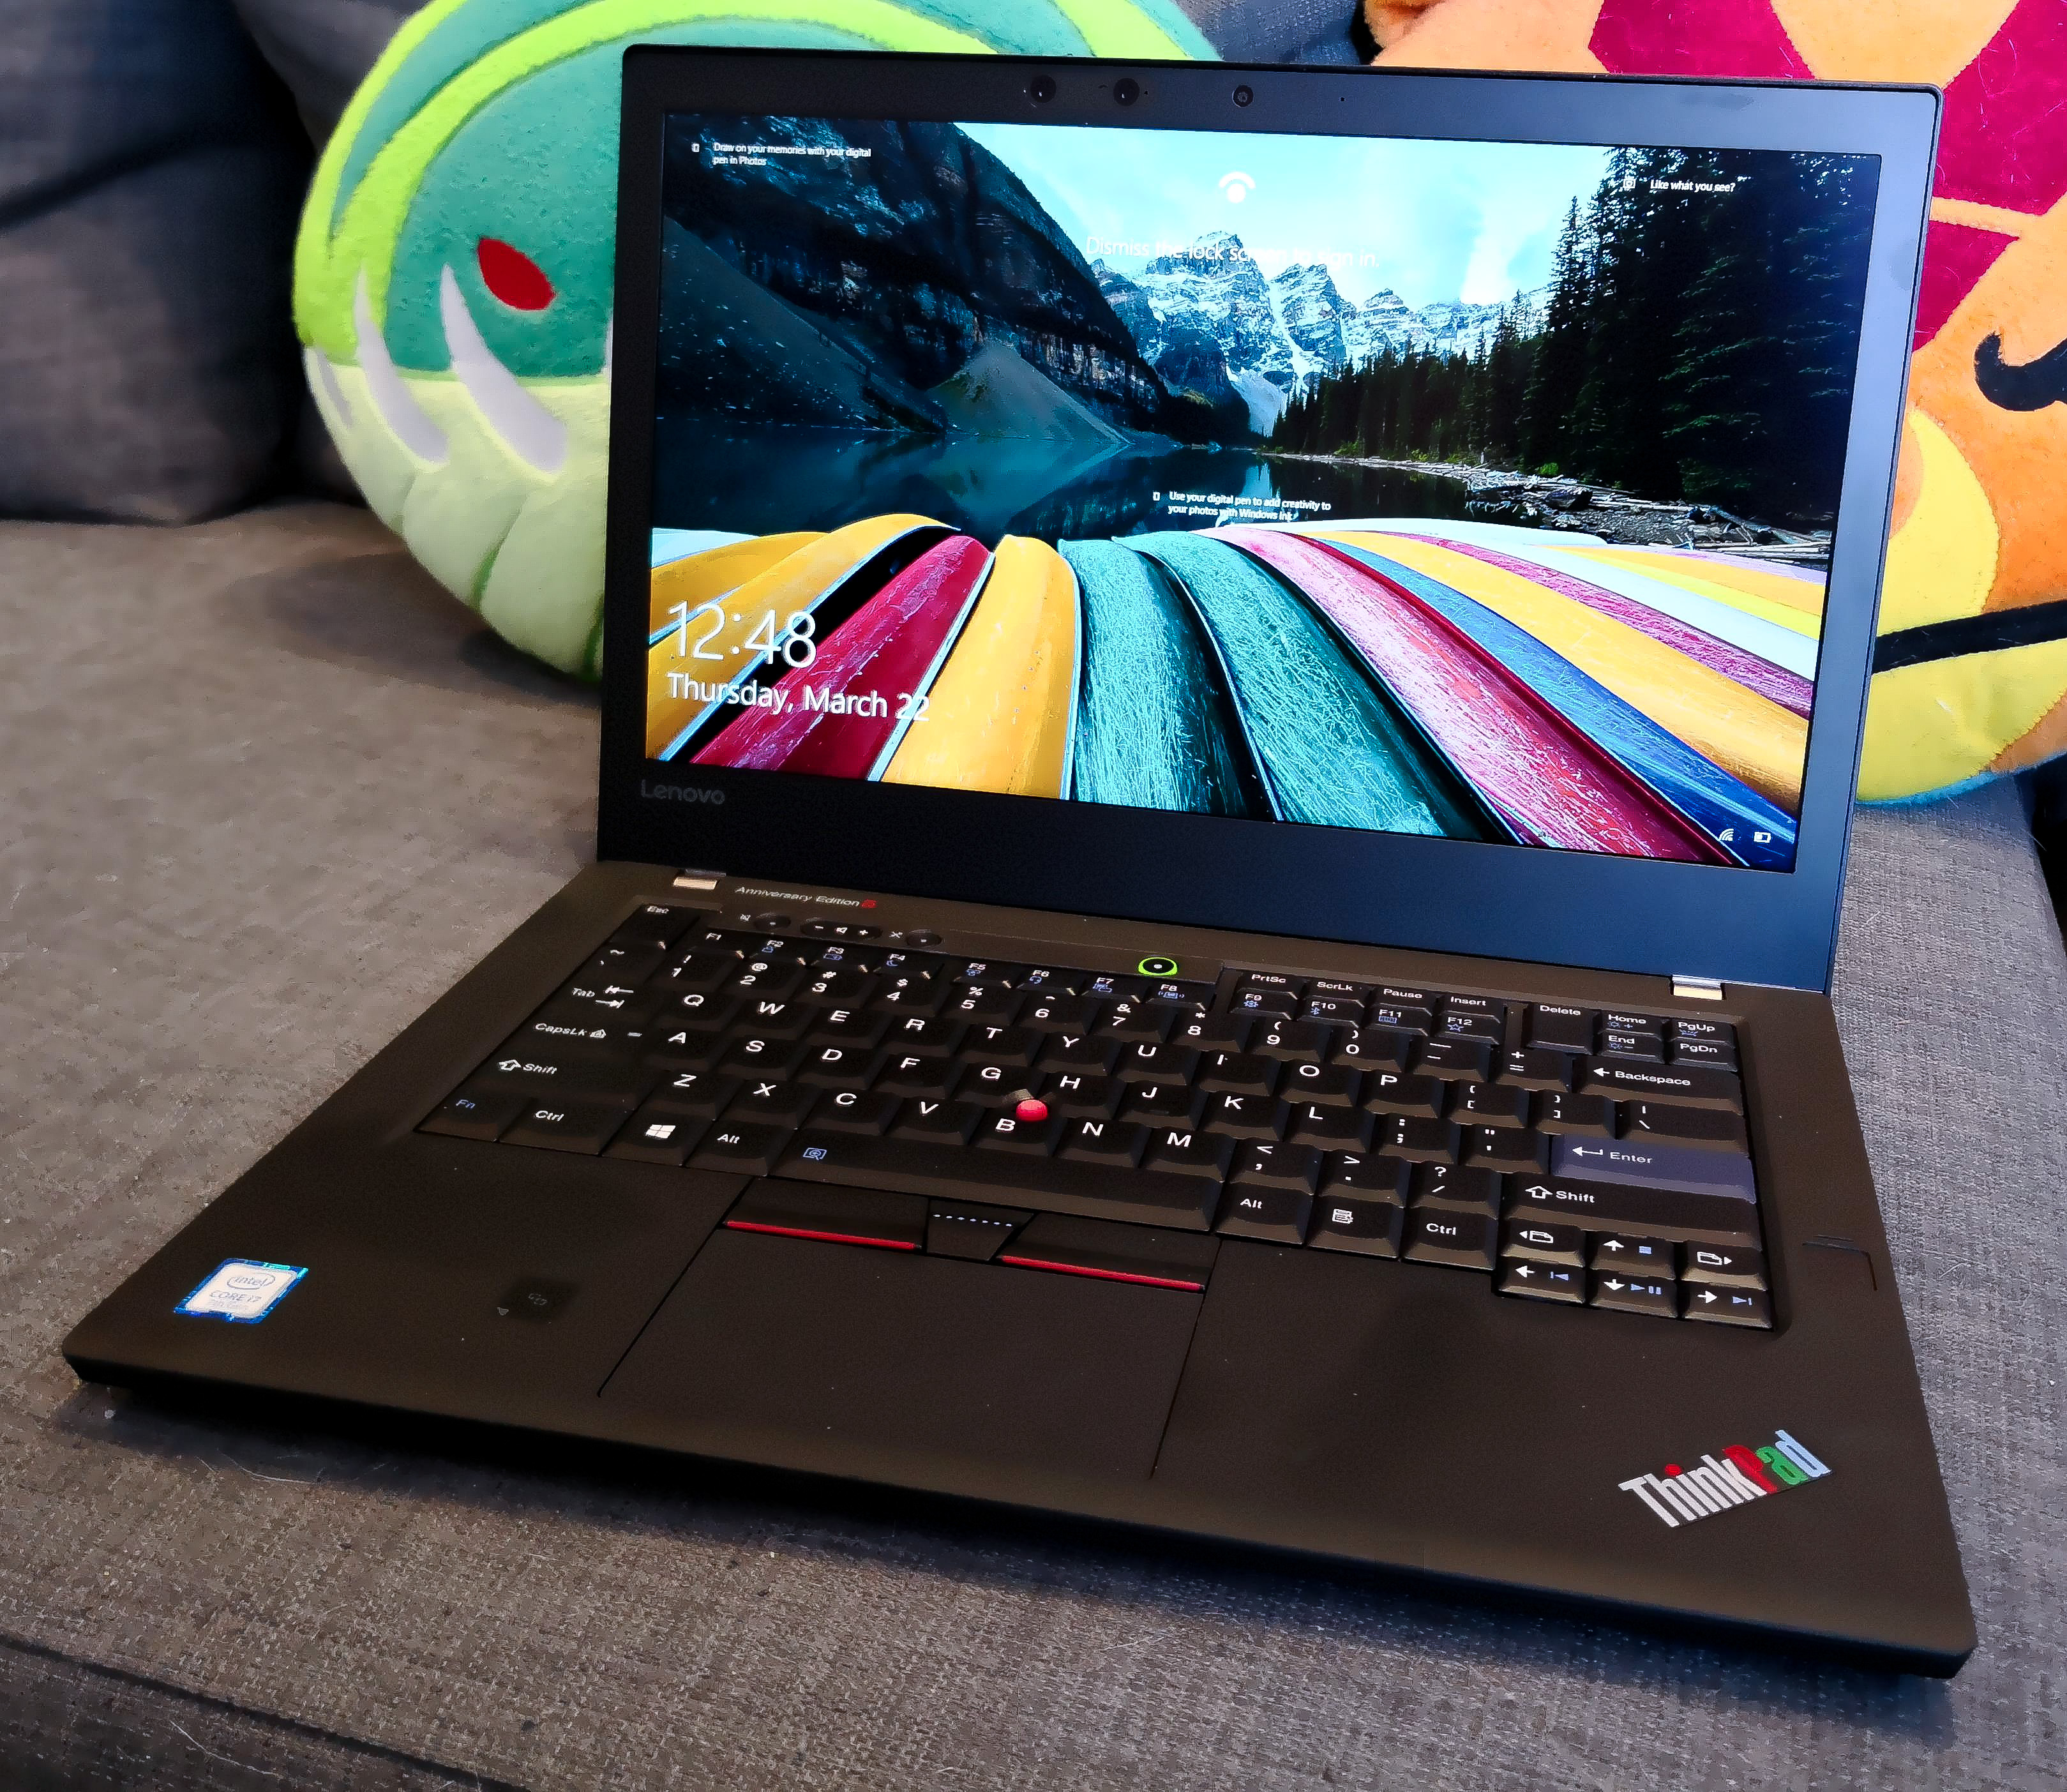 The 25th-anniversary ThinkPad: Every laptop should add some retro appeal |  Ars Technica